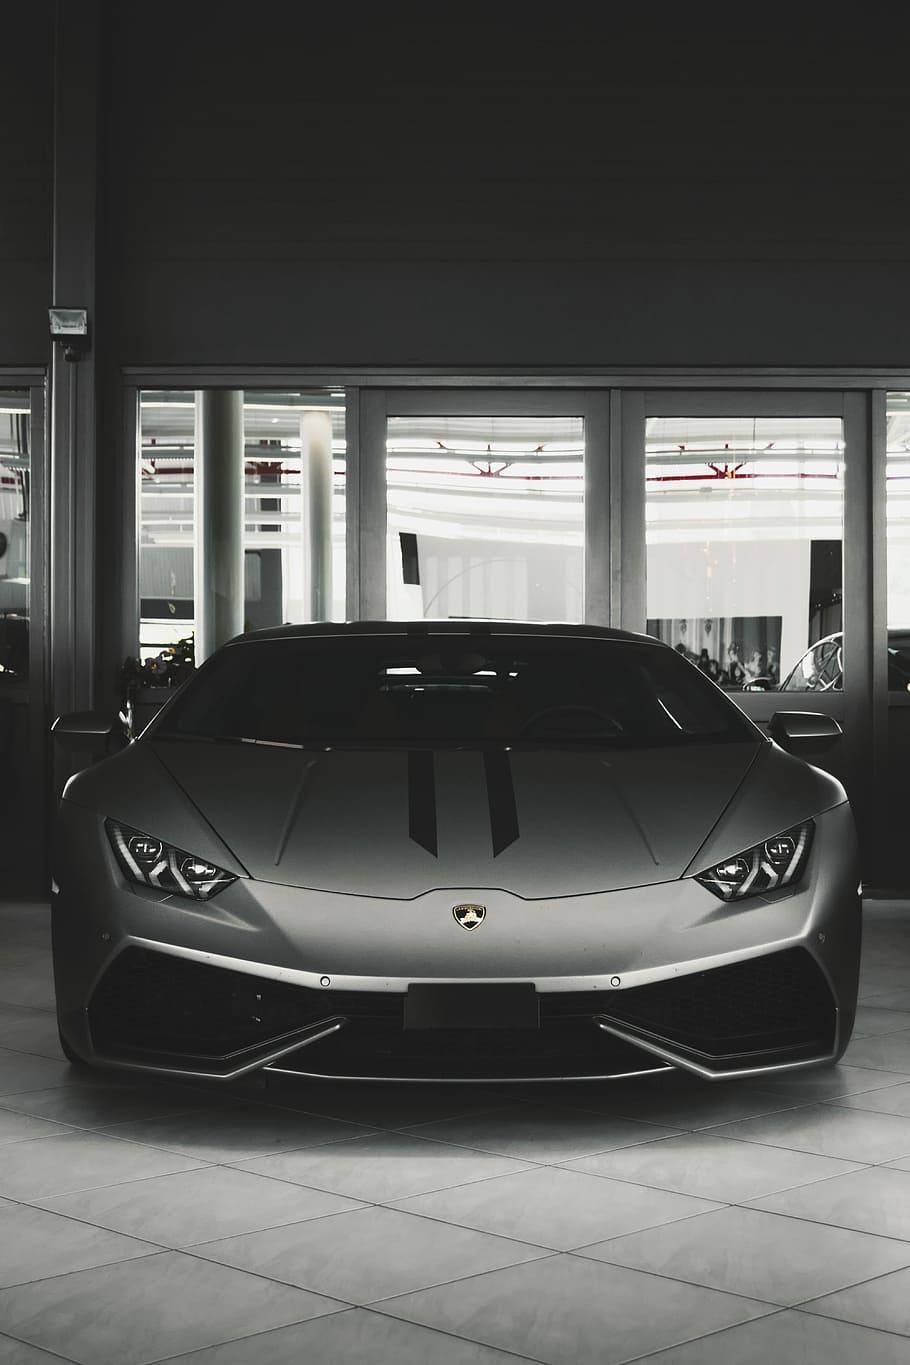 gray coupe on parking area, gray Lamborghini Huracan parked inside the building, HD wallpaper